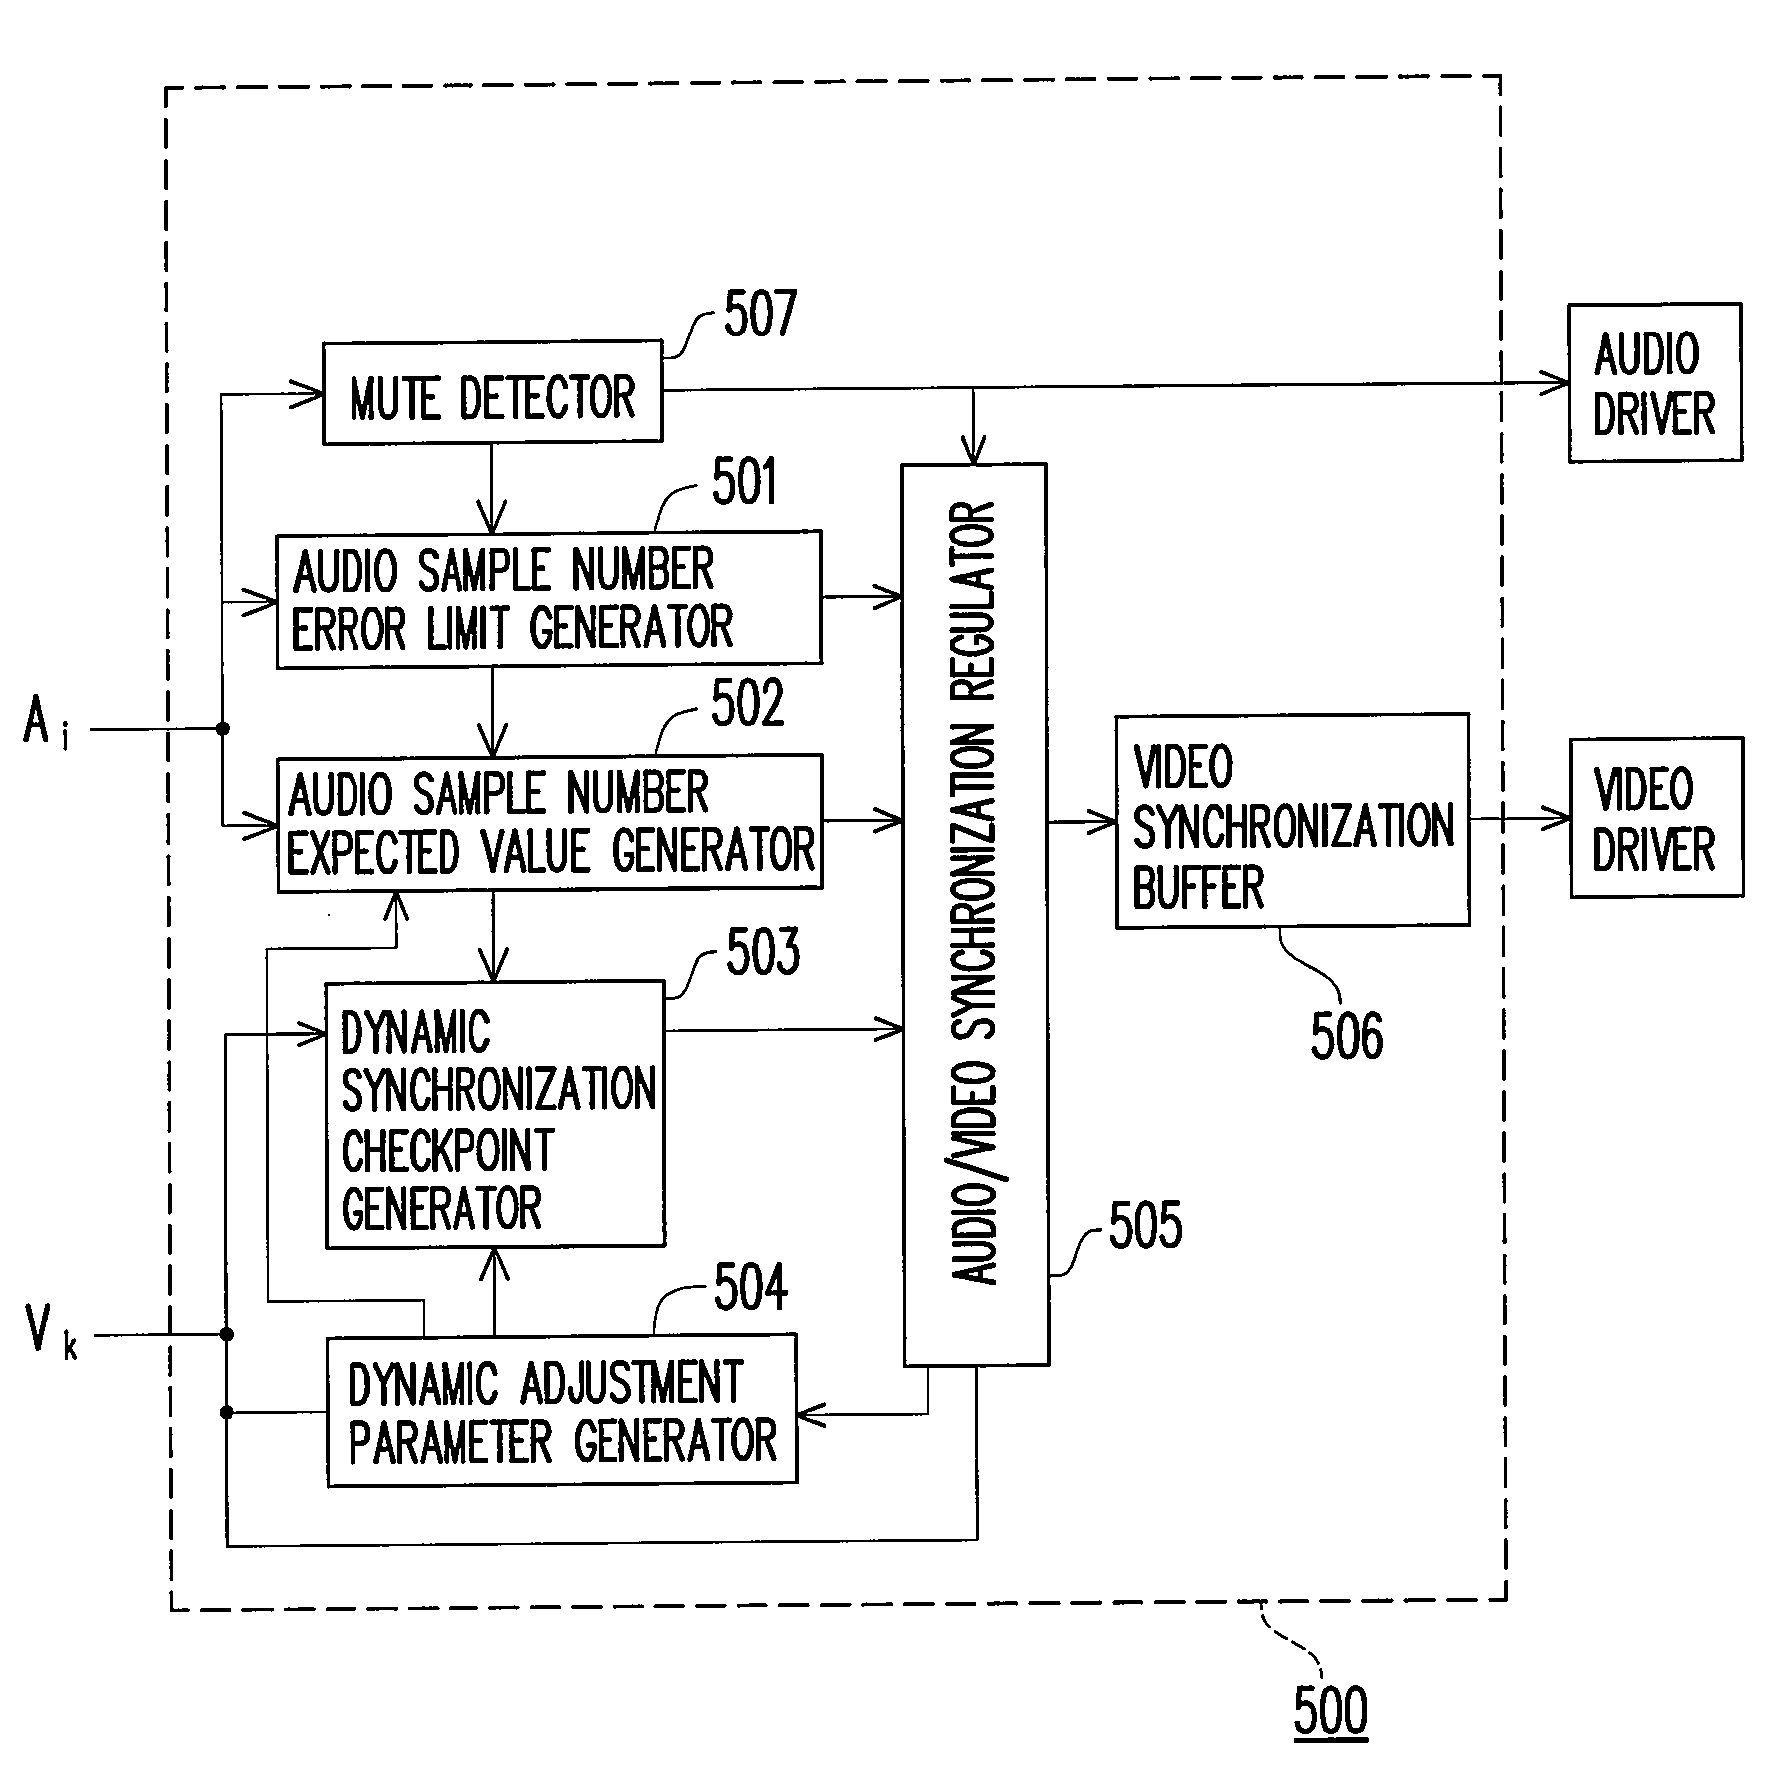 Method and apparatus for audio/video synchronization